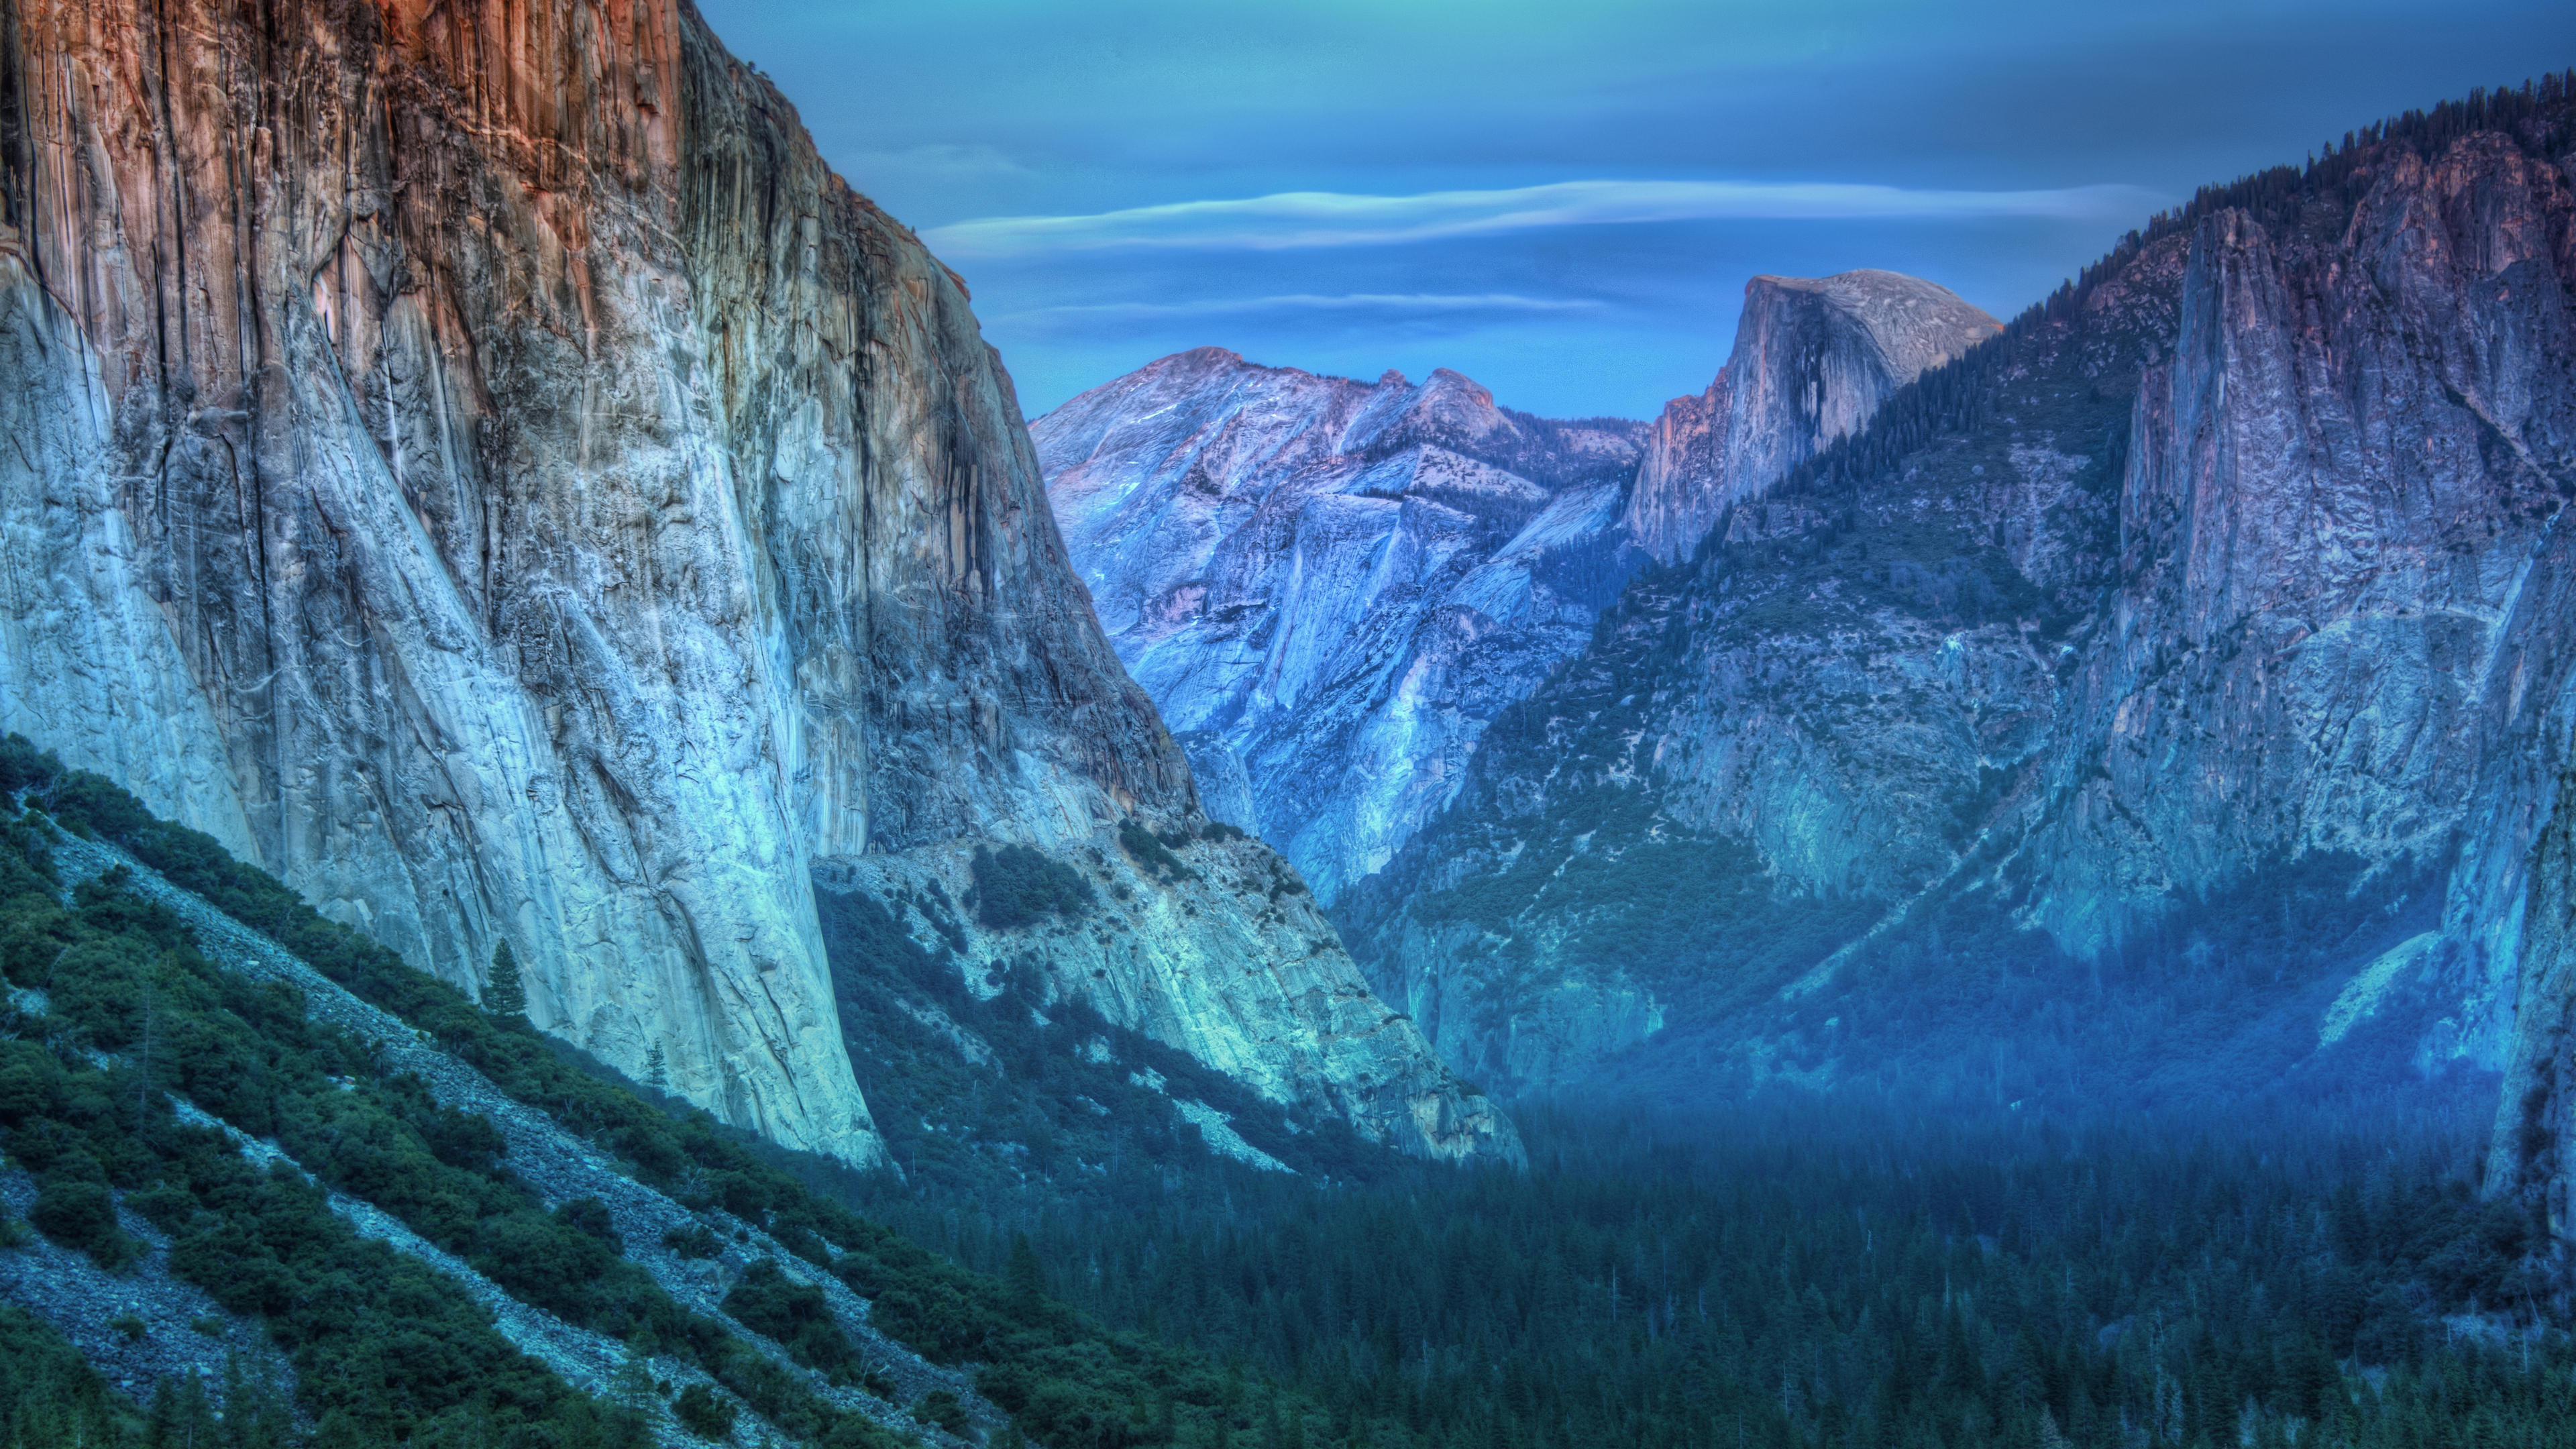 General 3840x2160 Trey Ratcliff 4K photography California mountains nature forest Yosemite Valley